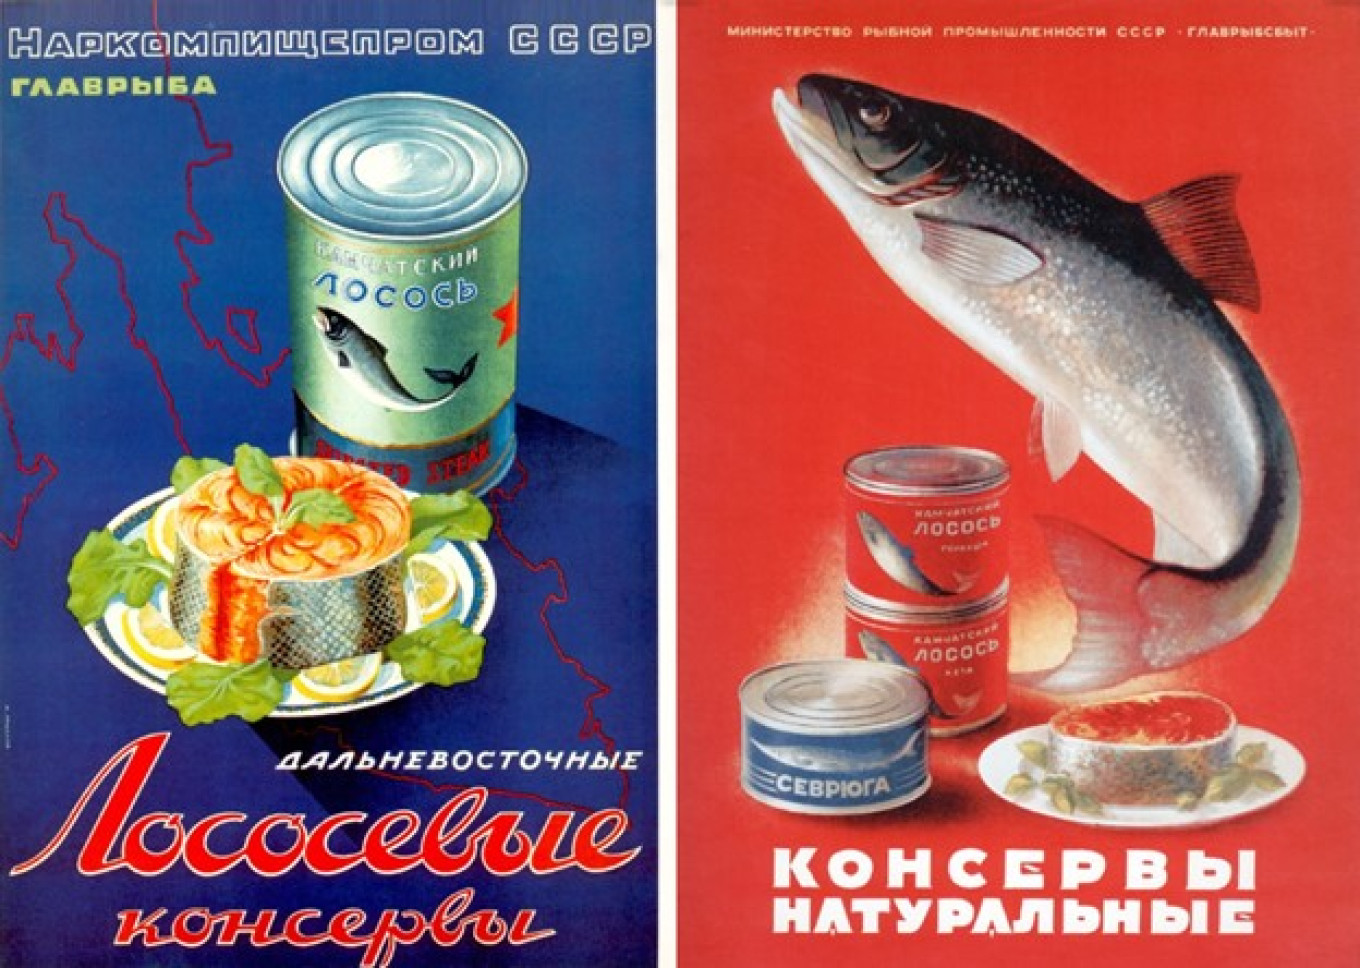 Soviet canned fish posters